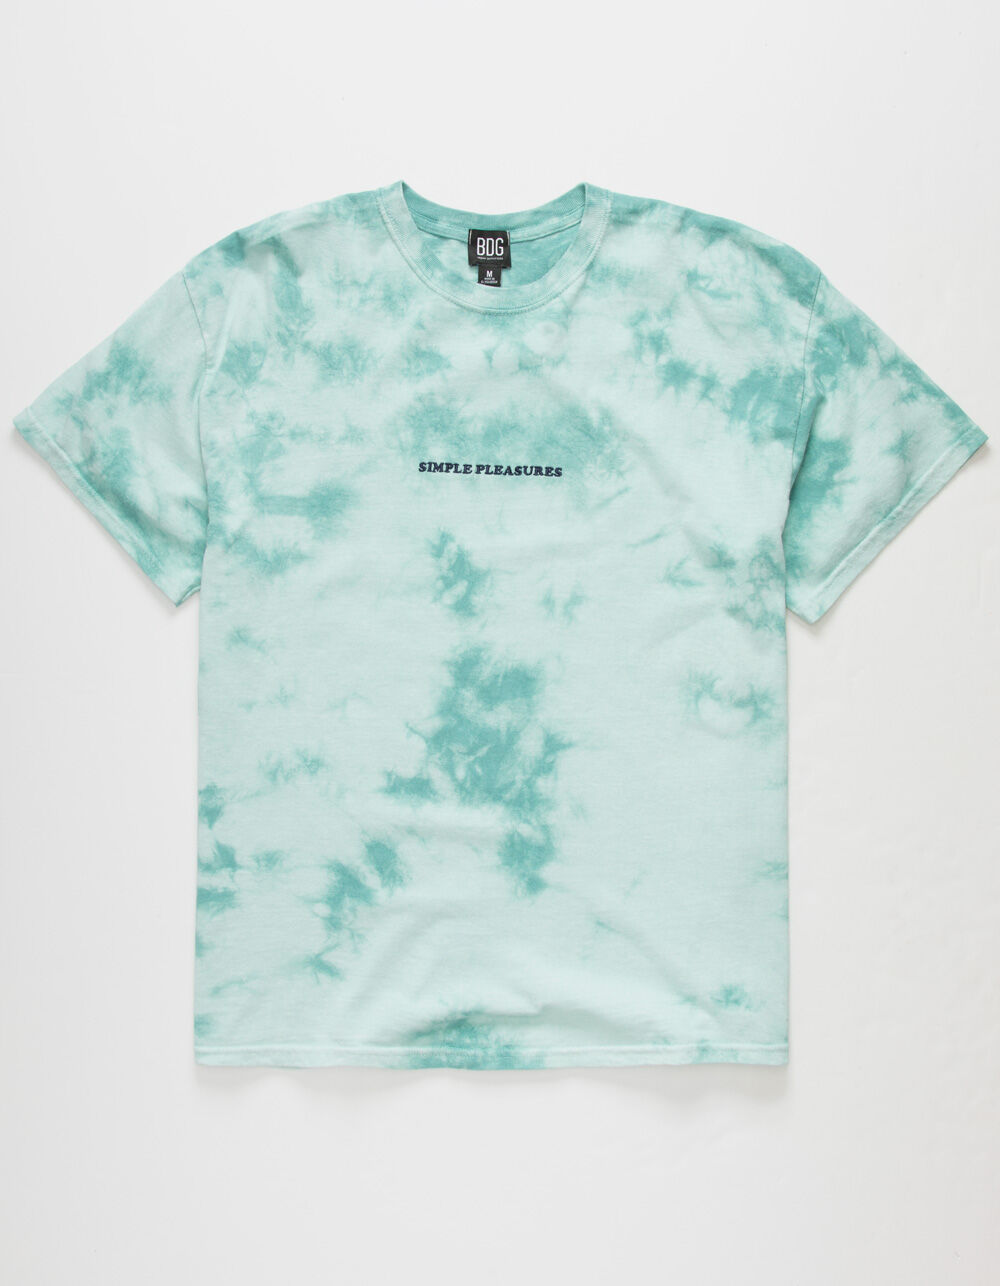 BDG Urban Outfitters Tie Dye Embroidered Mens Mint T-Shirt - MINT | Tillys